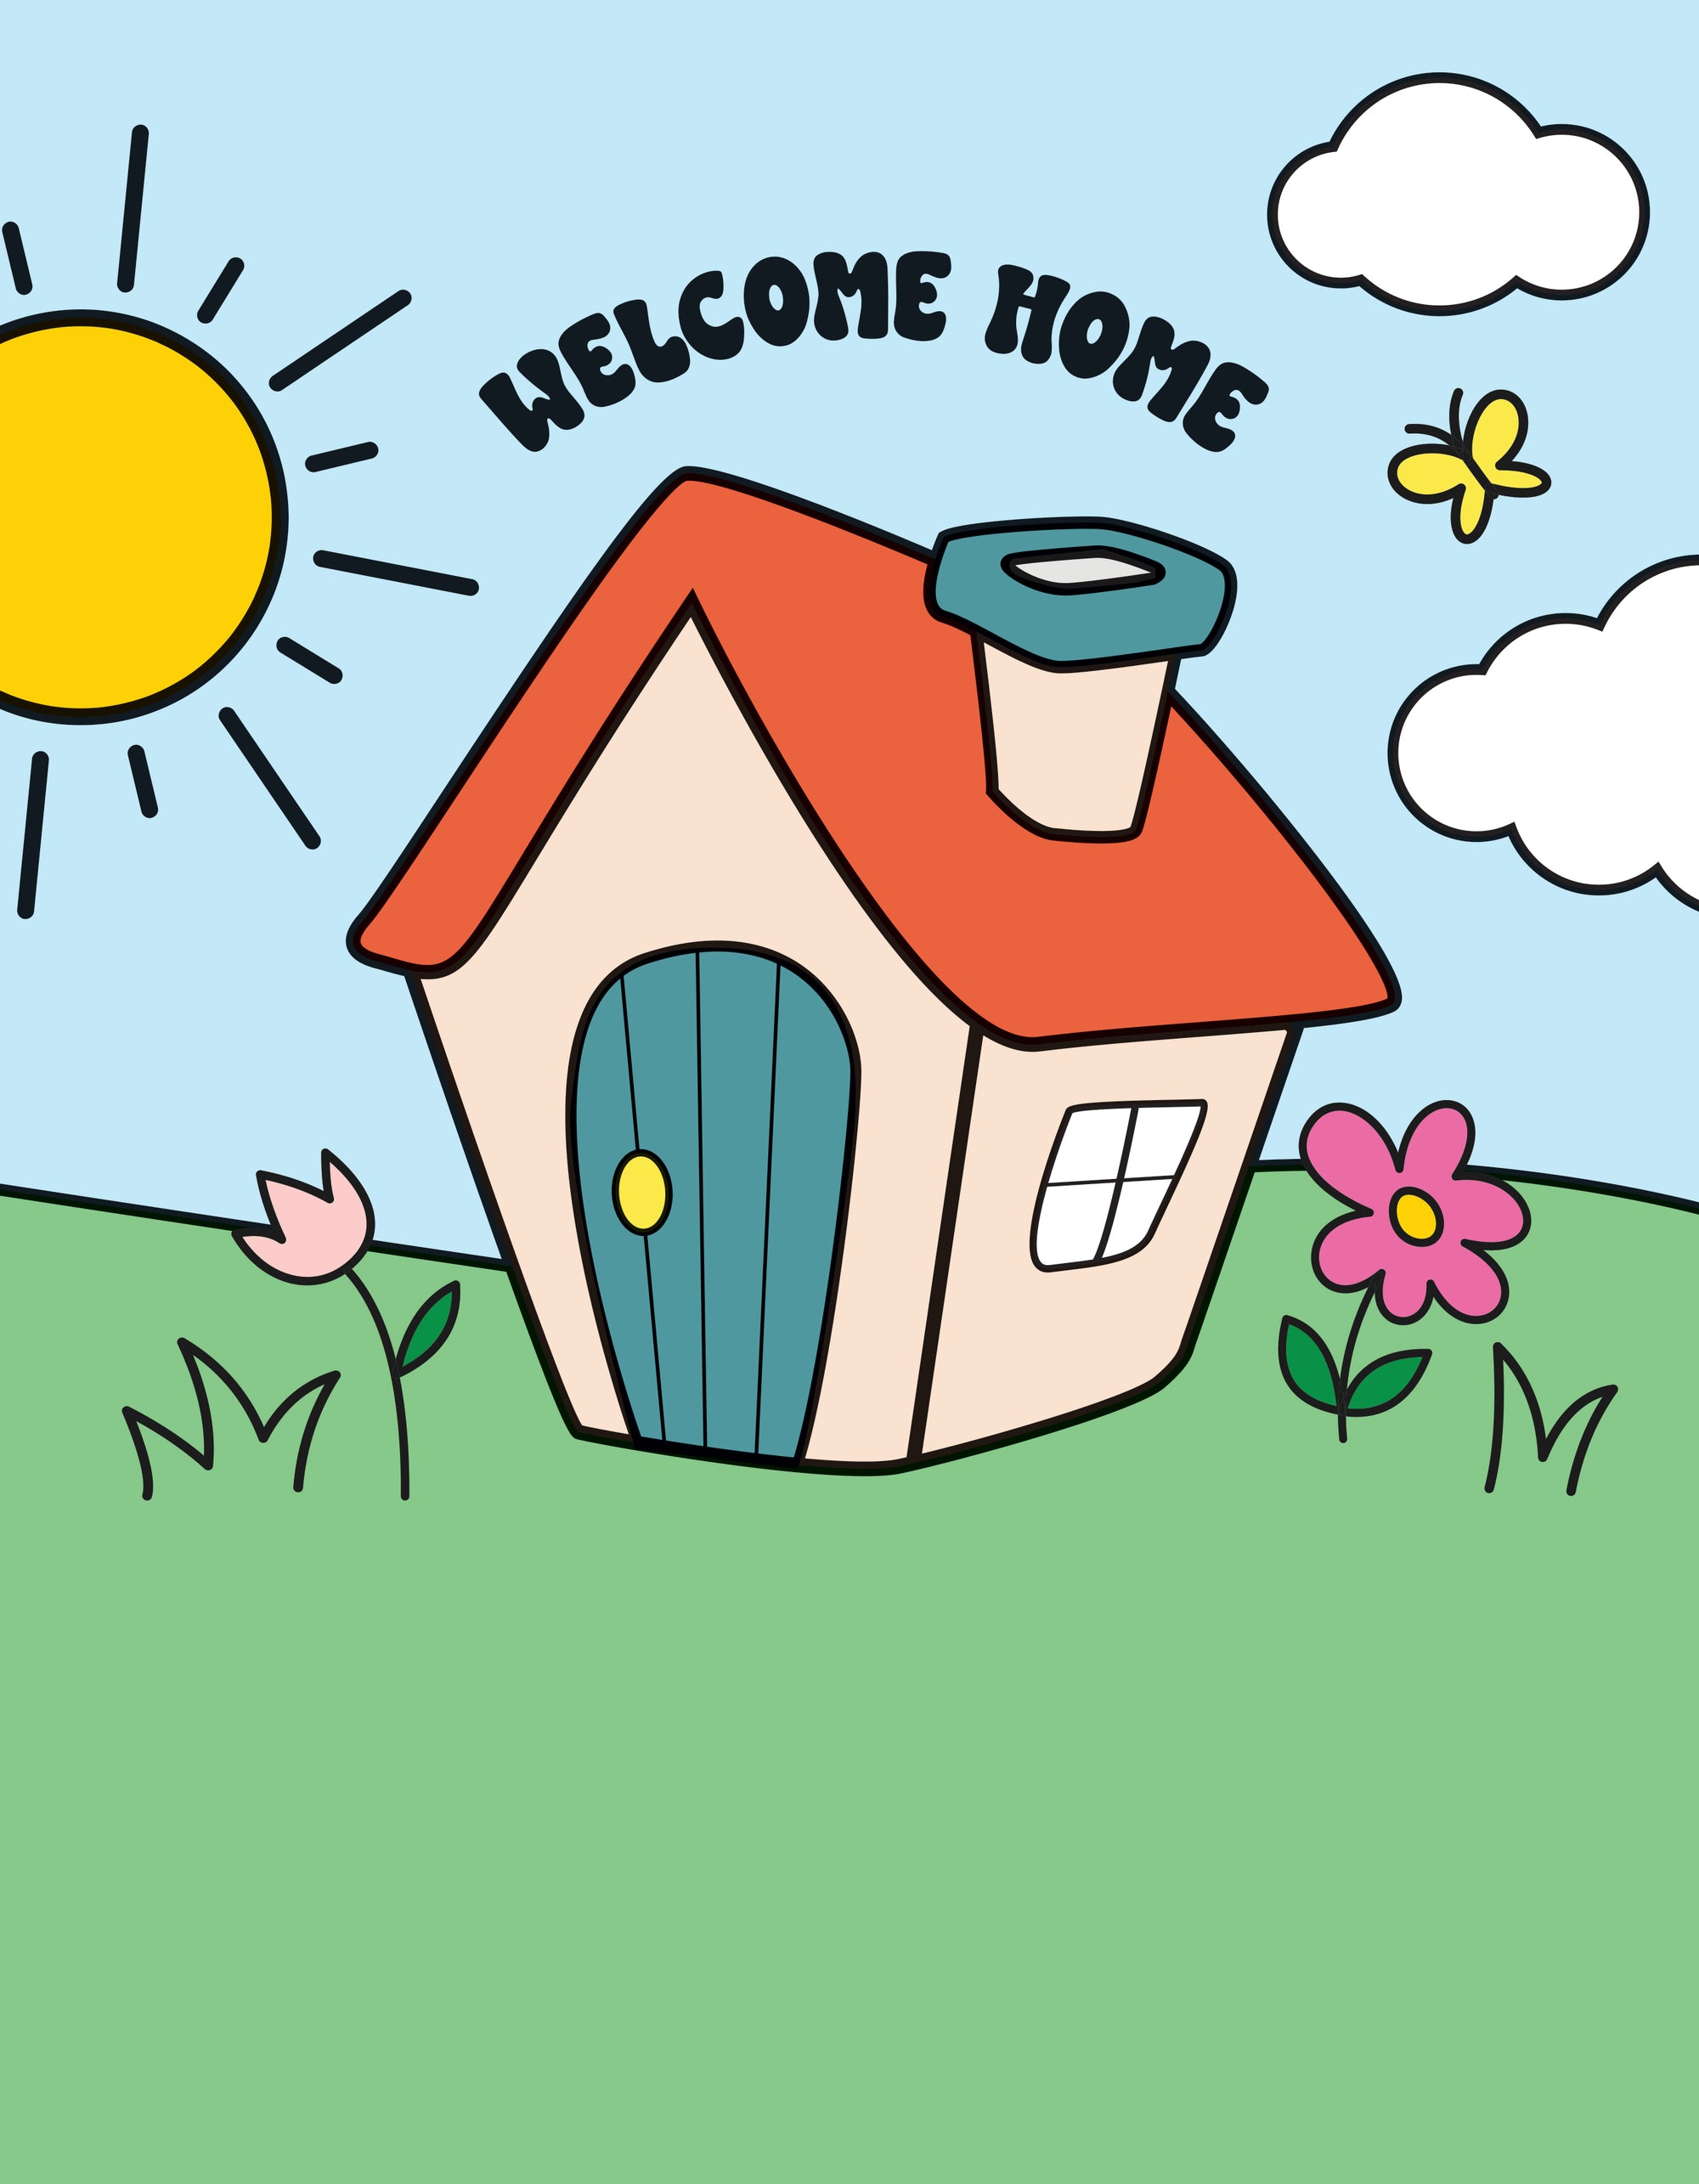 Welcome Home coloring book for realtors.